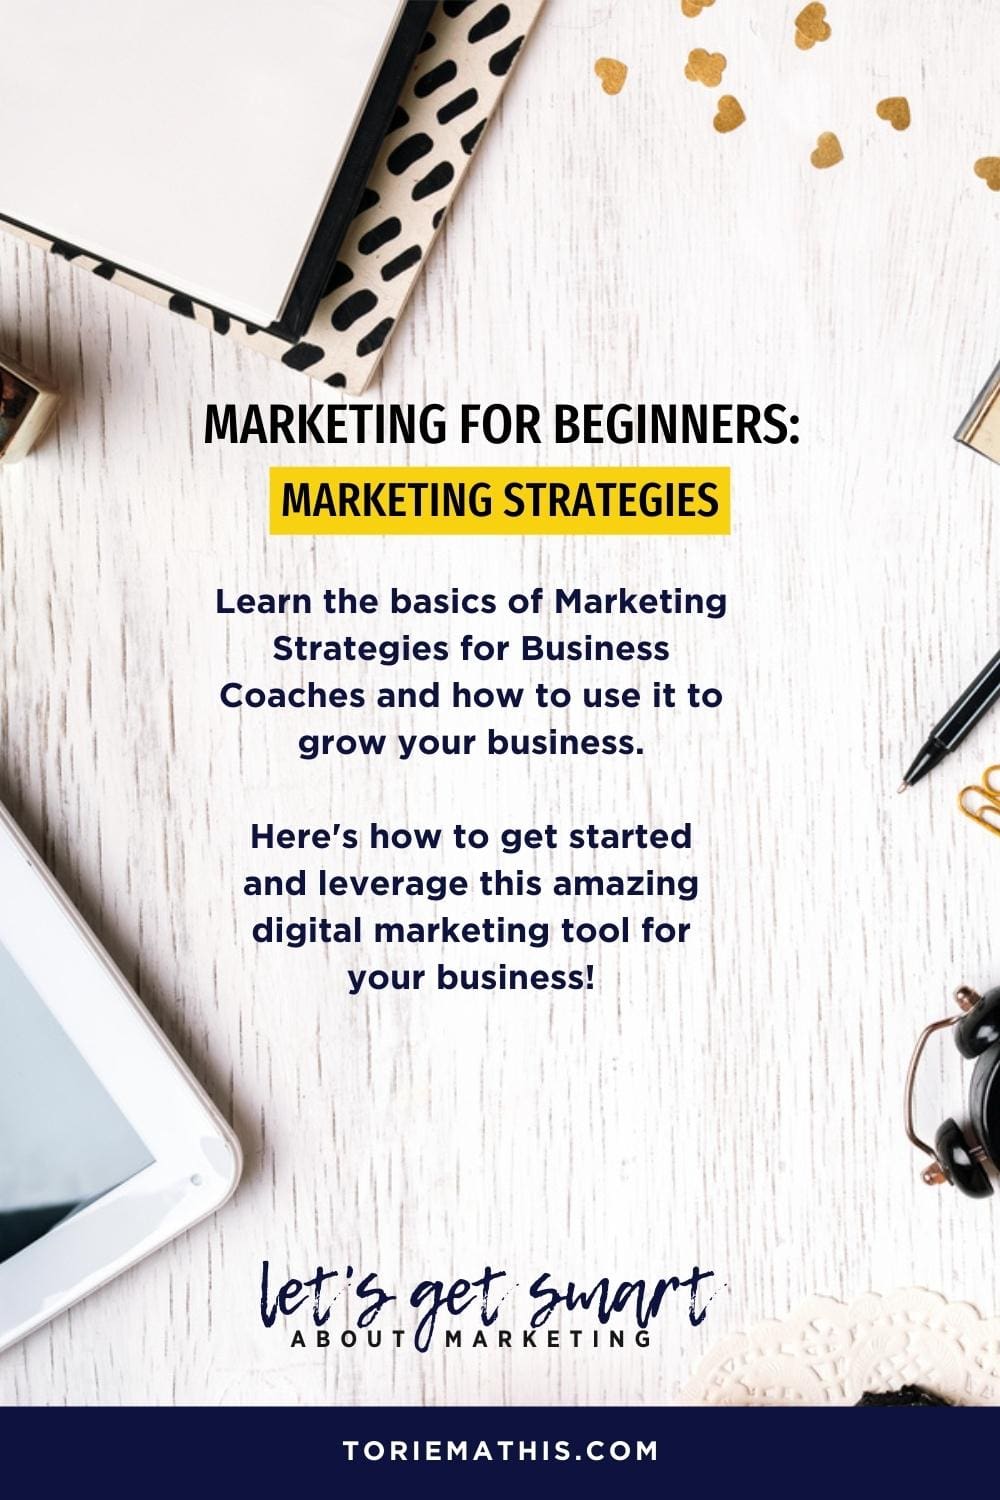 10 Low-Cost Marketing Strategies for Business Coaches